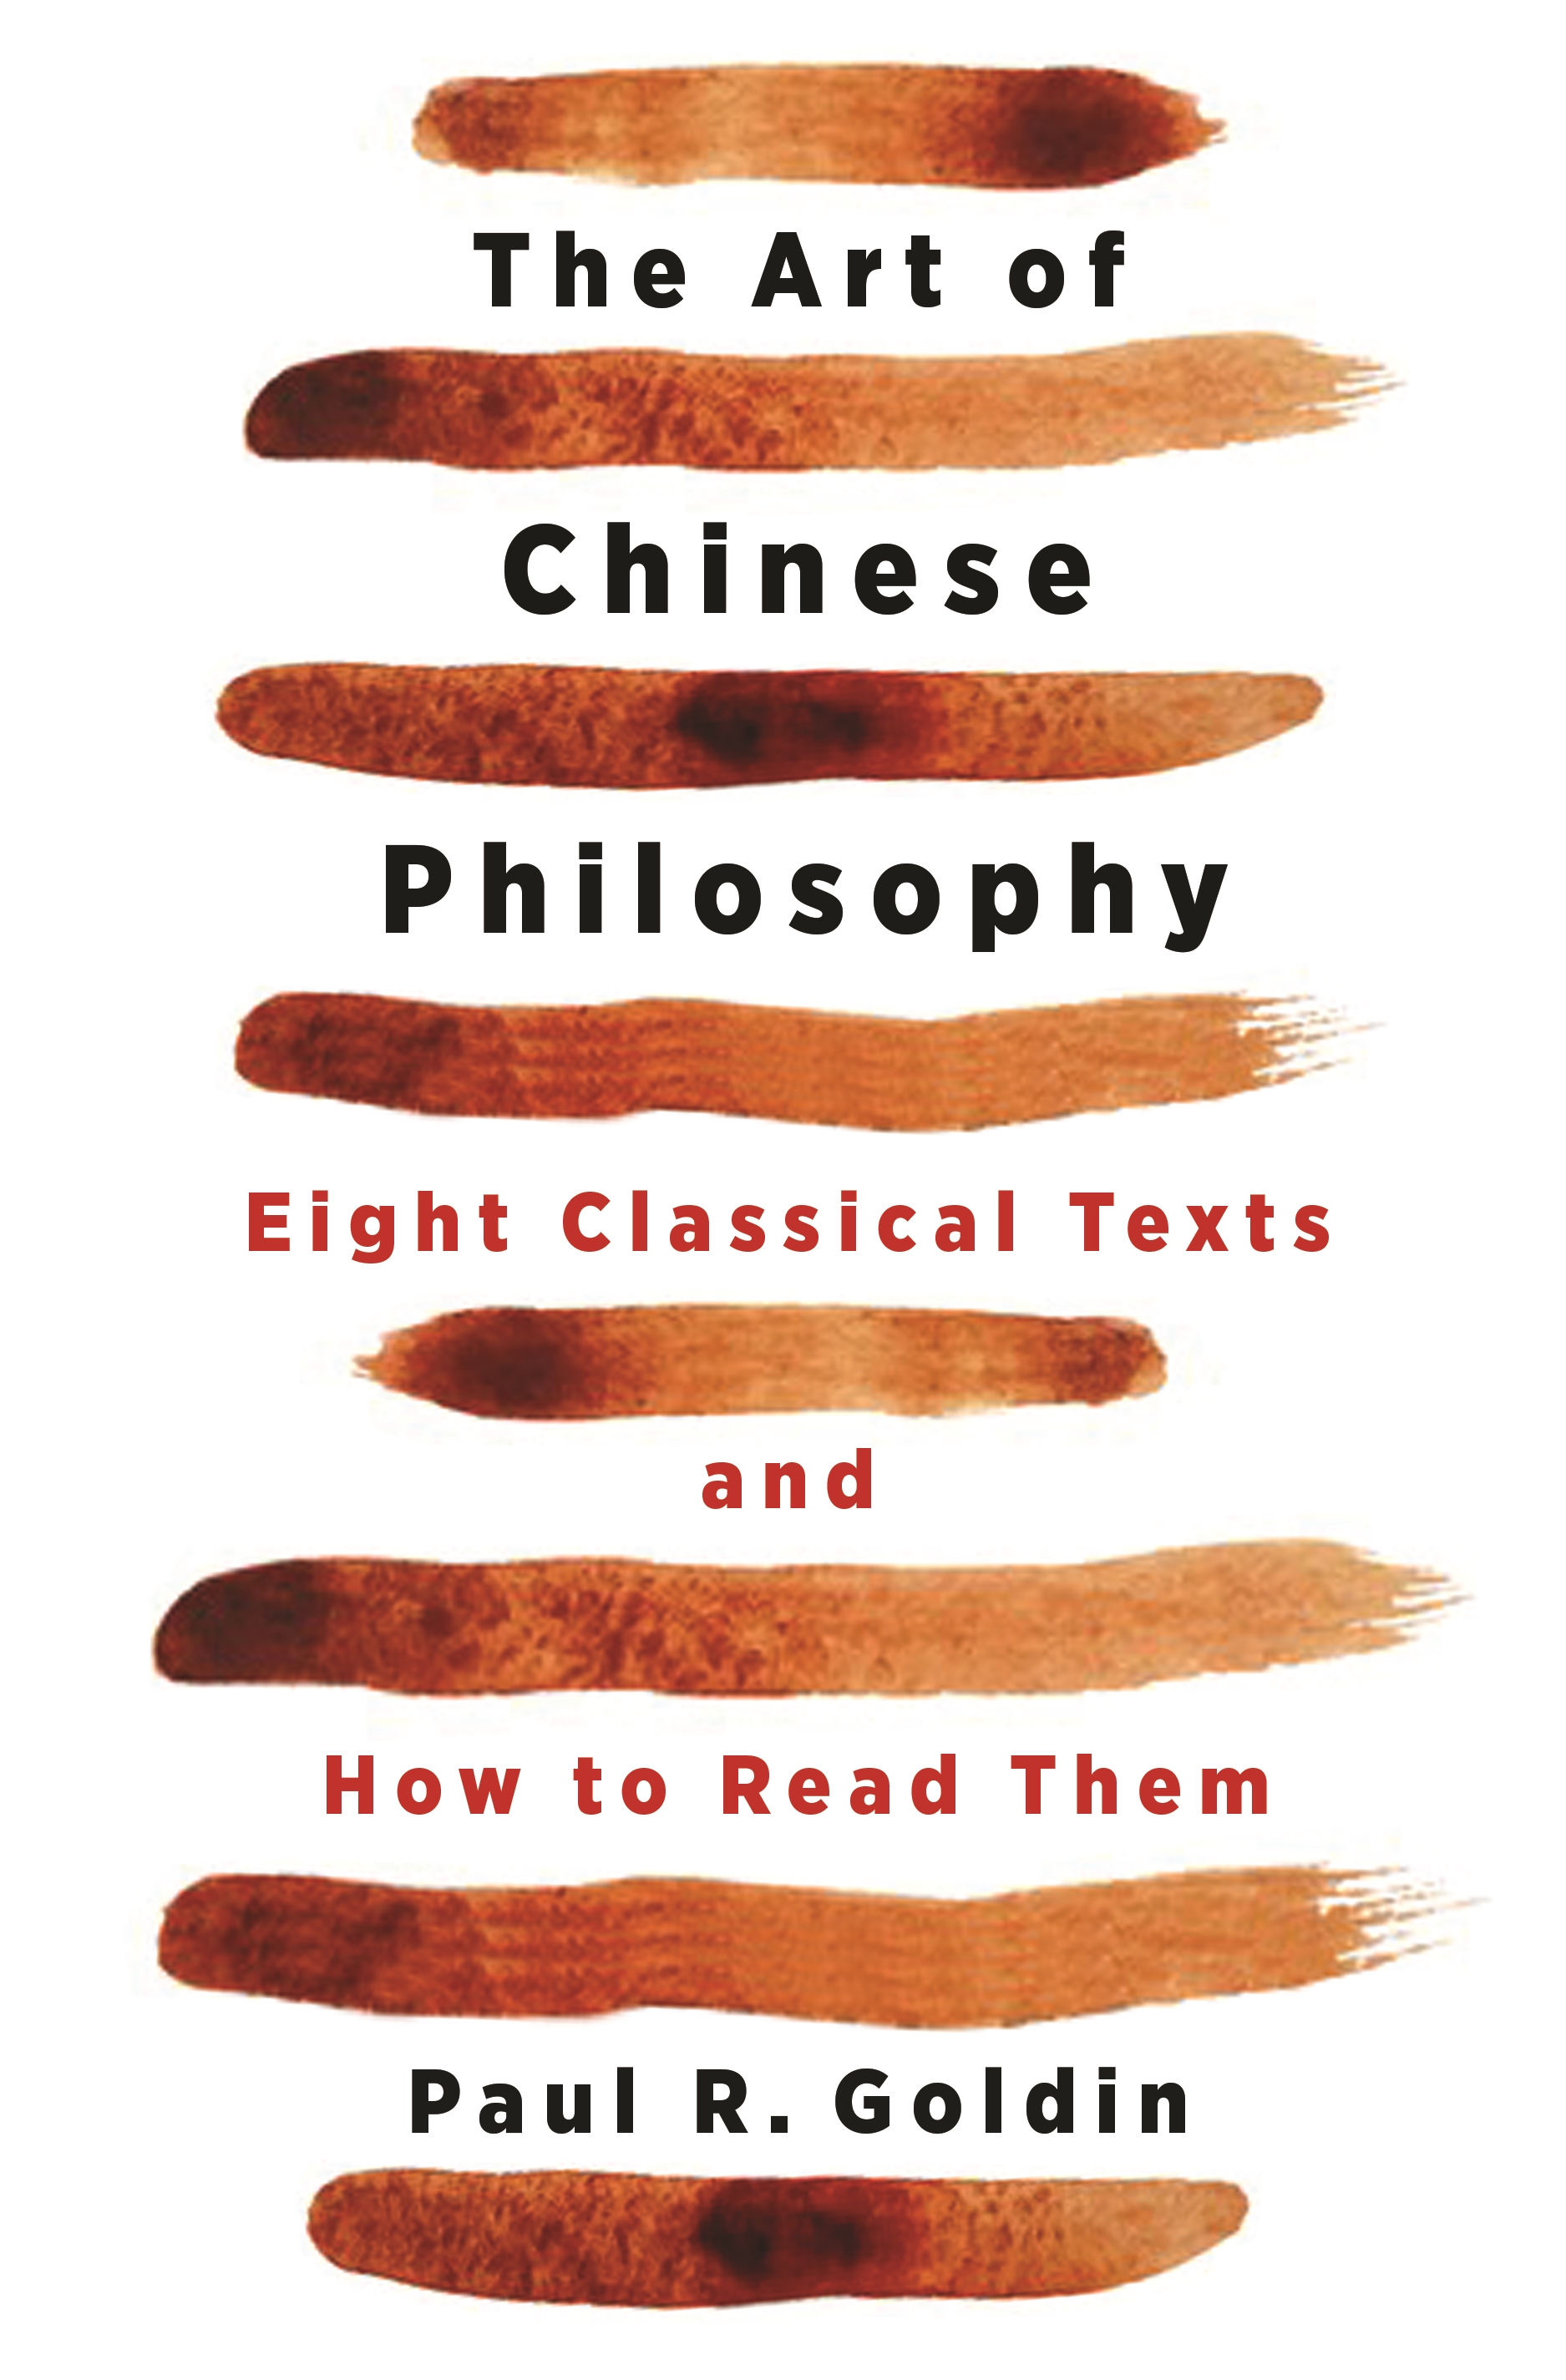 Photo Of Book Cover For The Book Entitled The Art Of Chinese Philosophy: Eight Classical Texts And How To Read Them